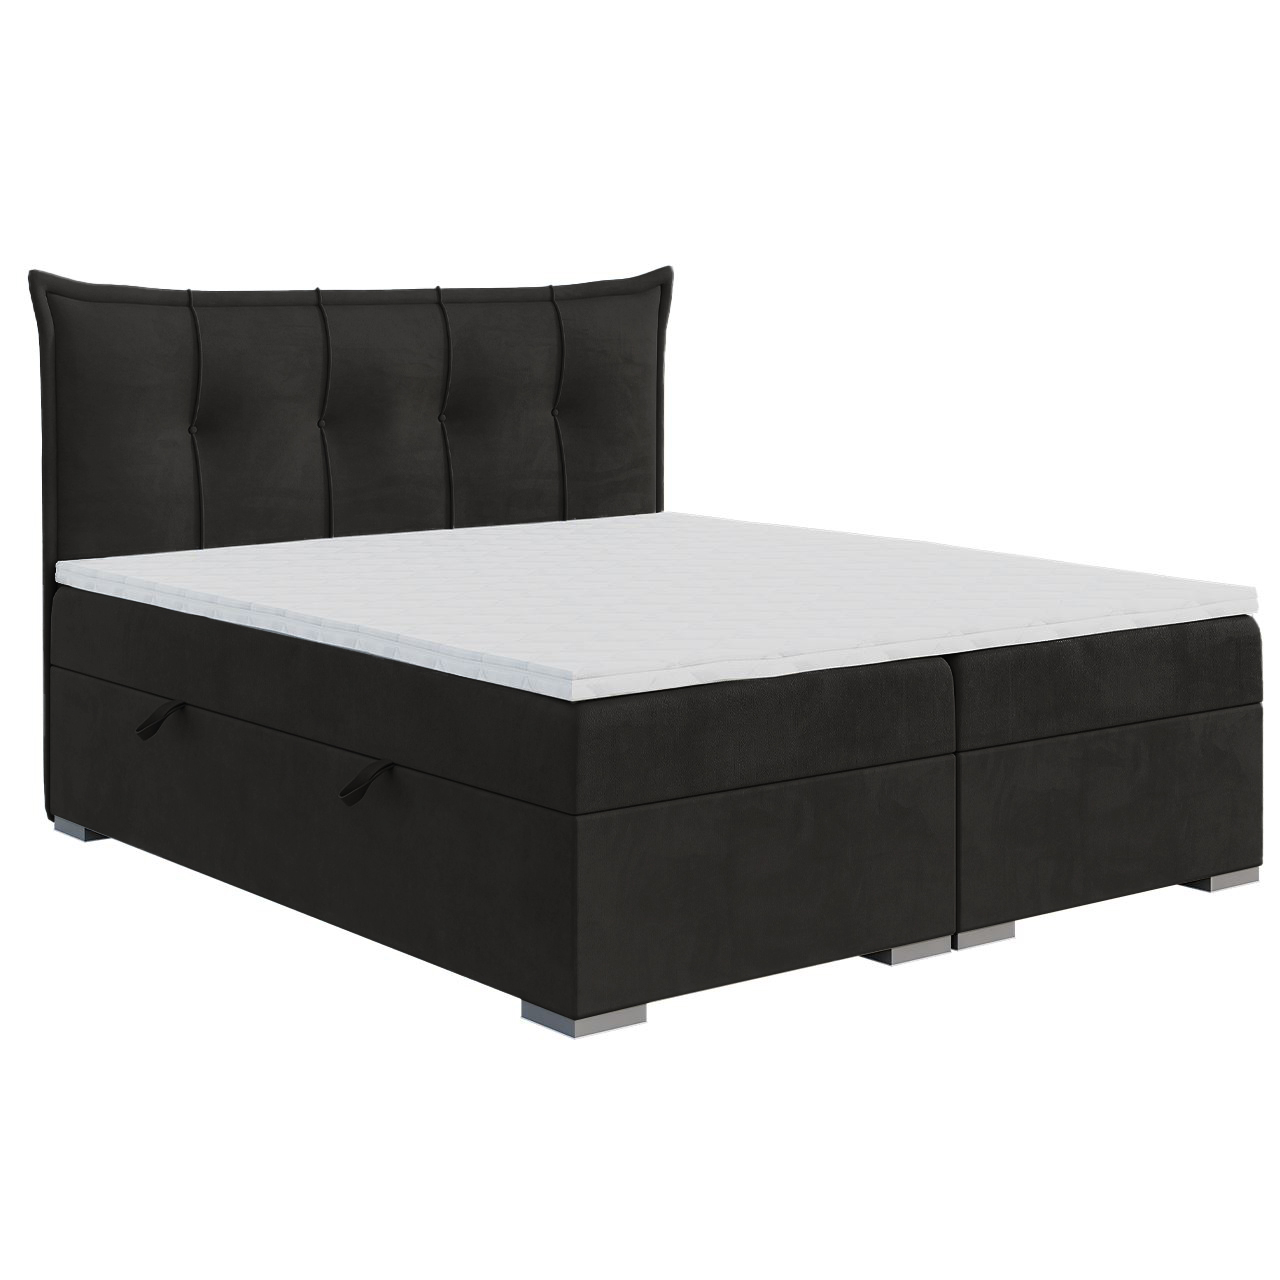 Upholstered bed MIRO 140x200 riviera 97